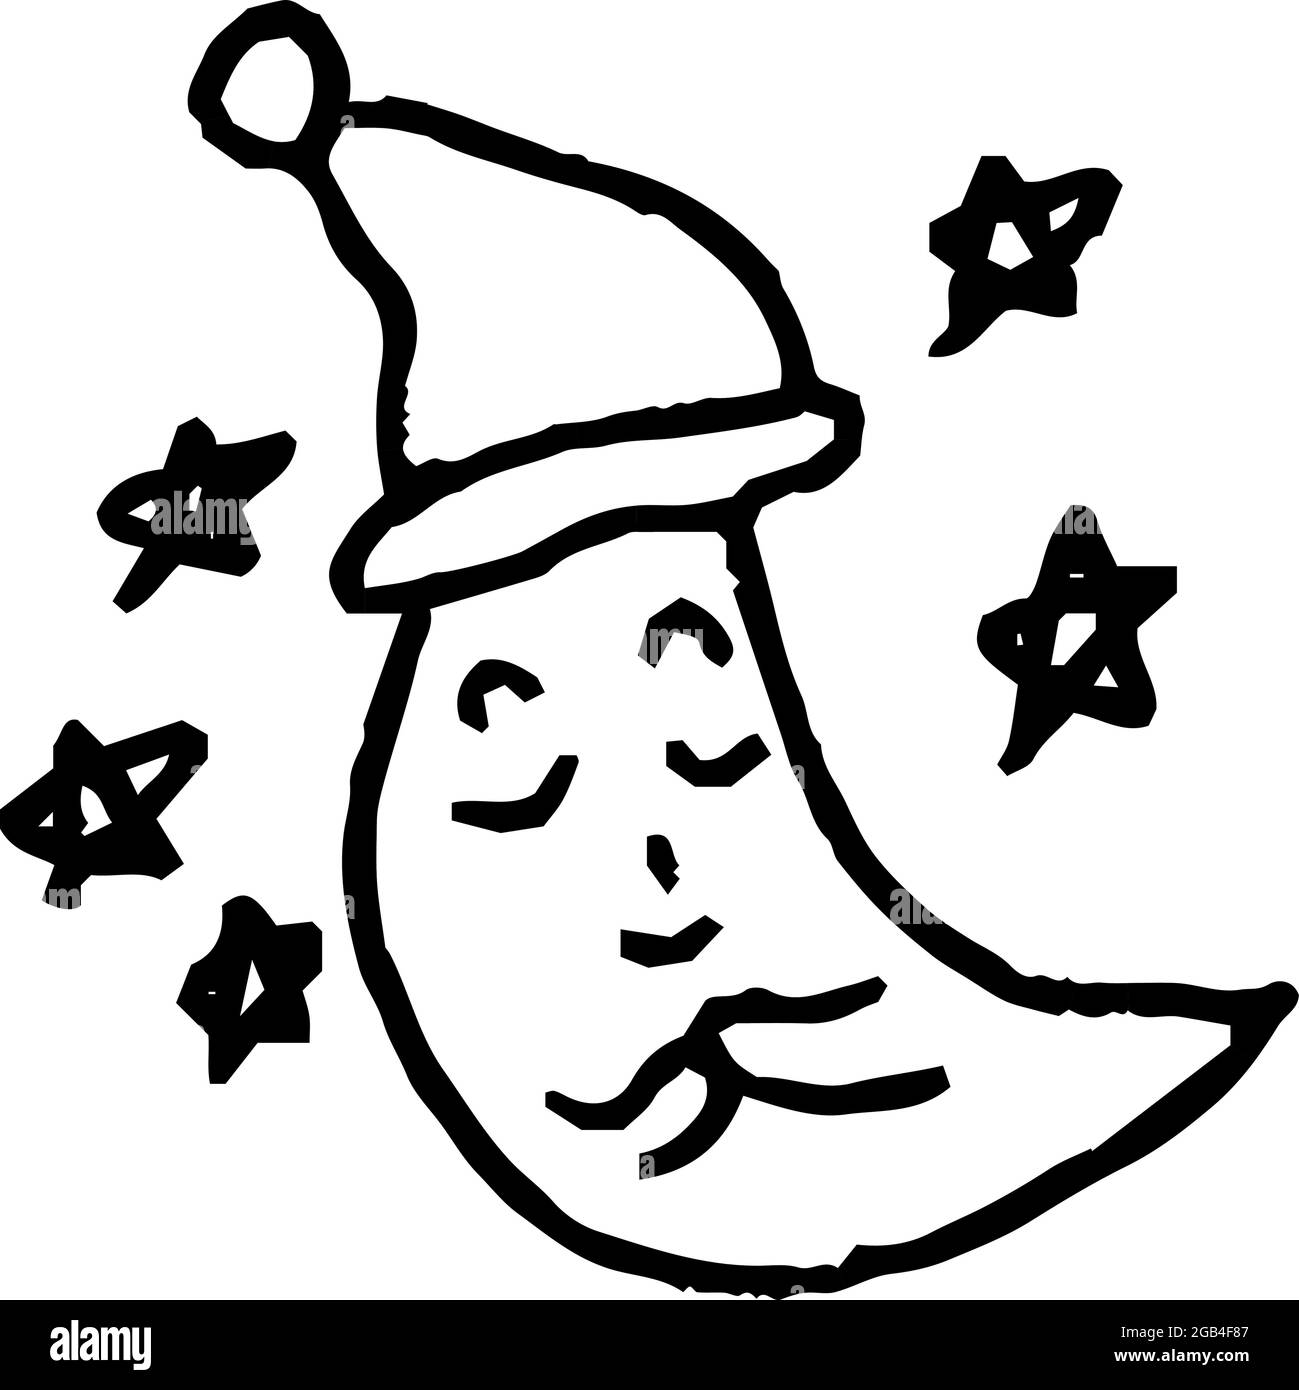 This is a illustration of Cute moon and star scribbles drawn by children Stock Vector